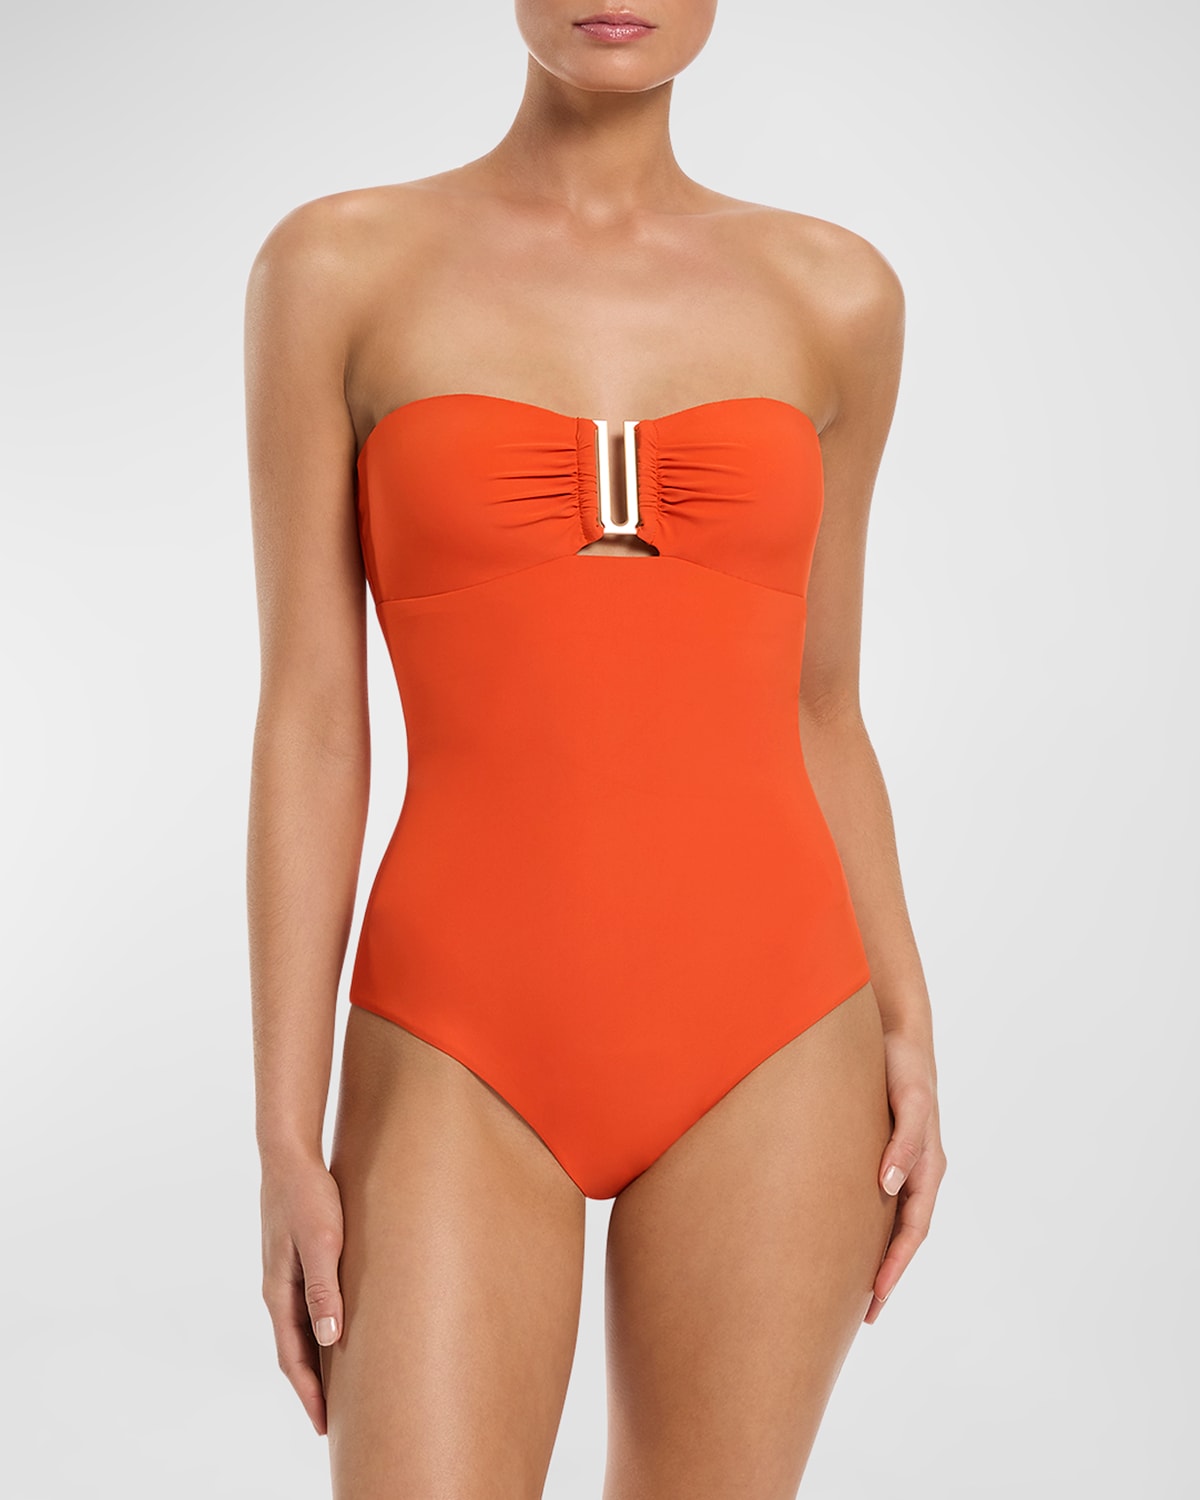 Jets Australia Jetset Bandeau One-piece Swimsuit In Coral